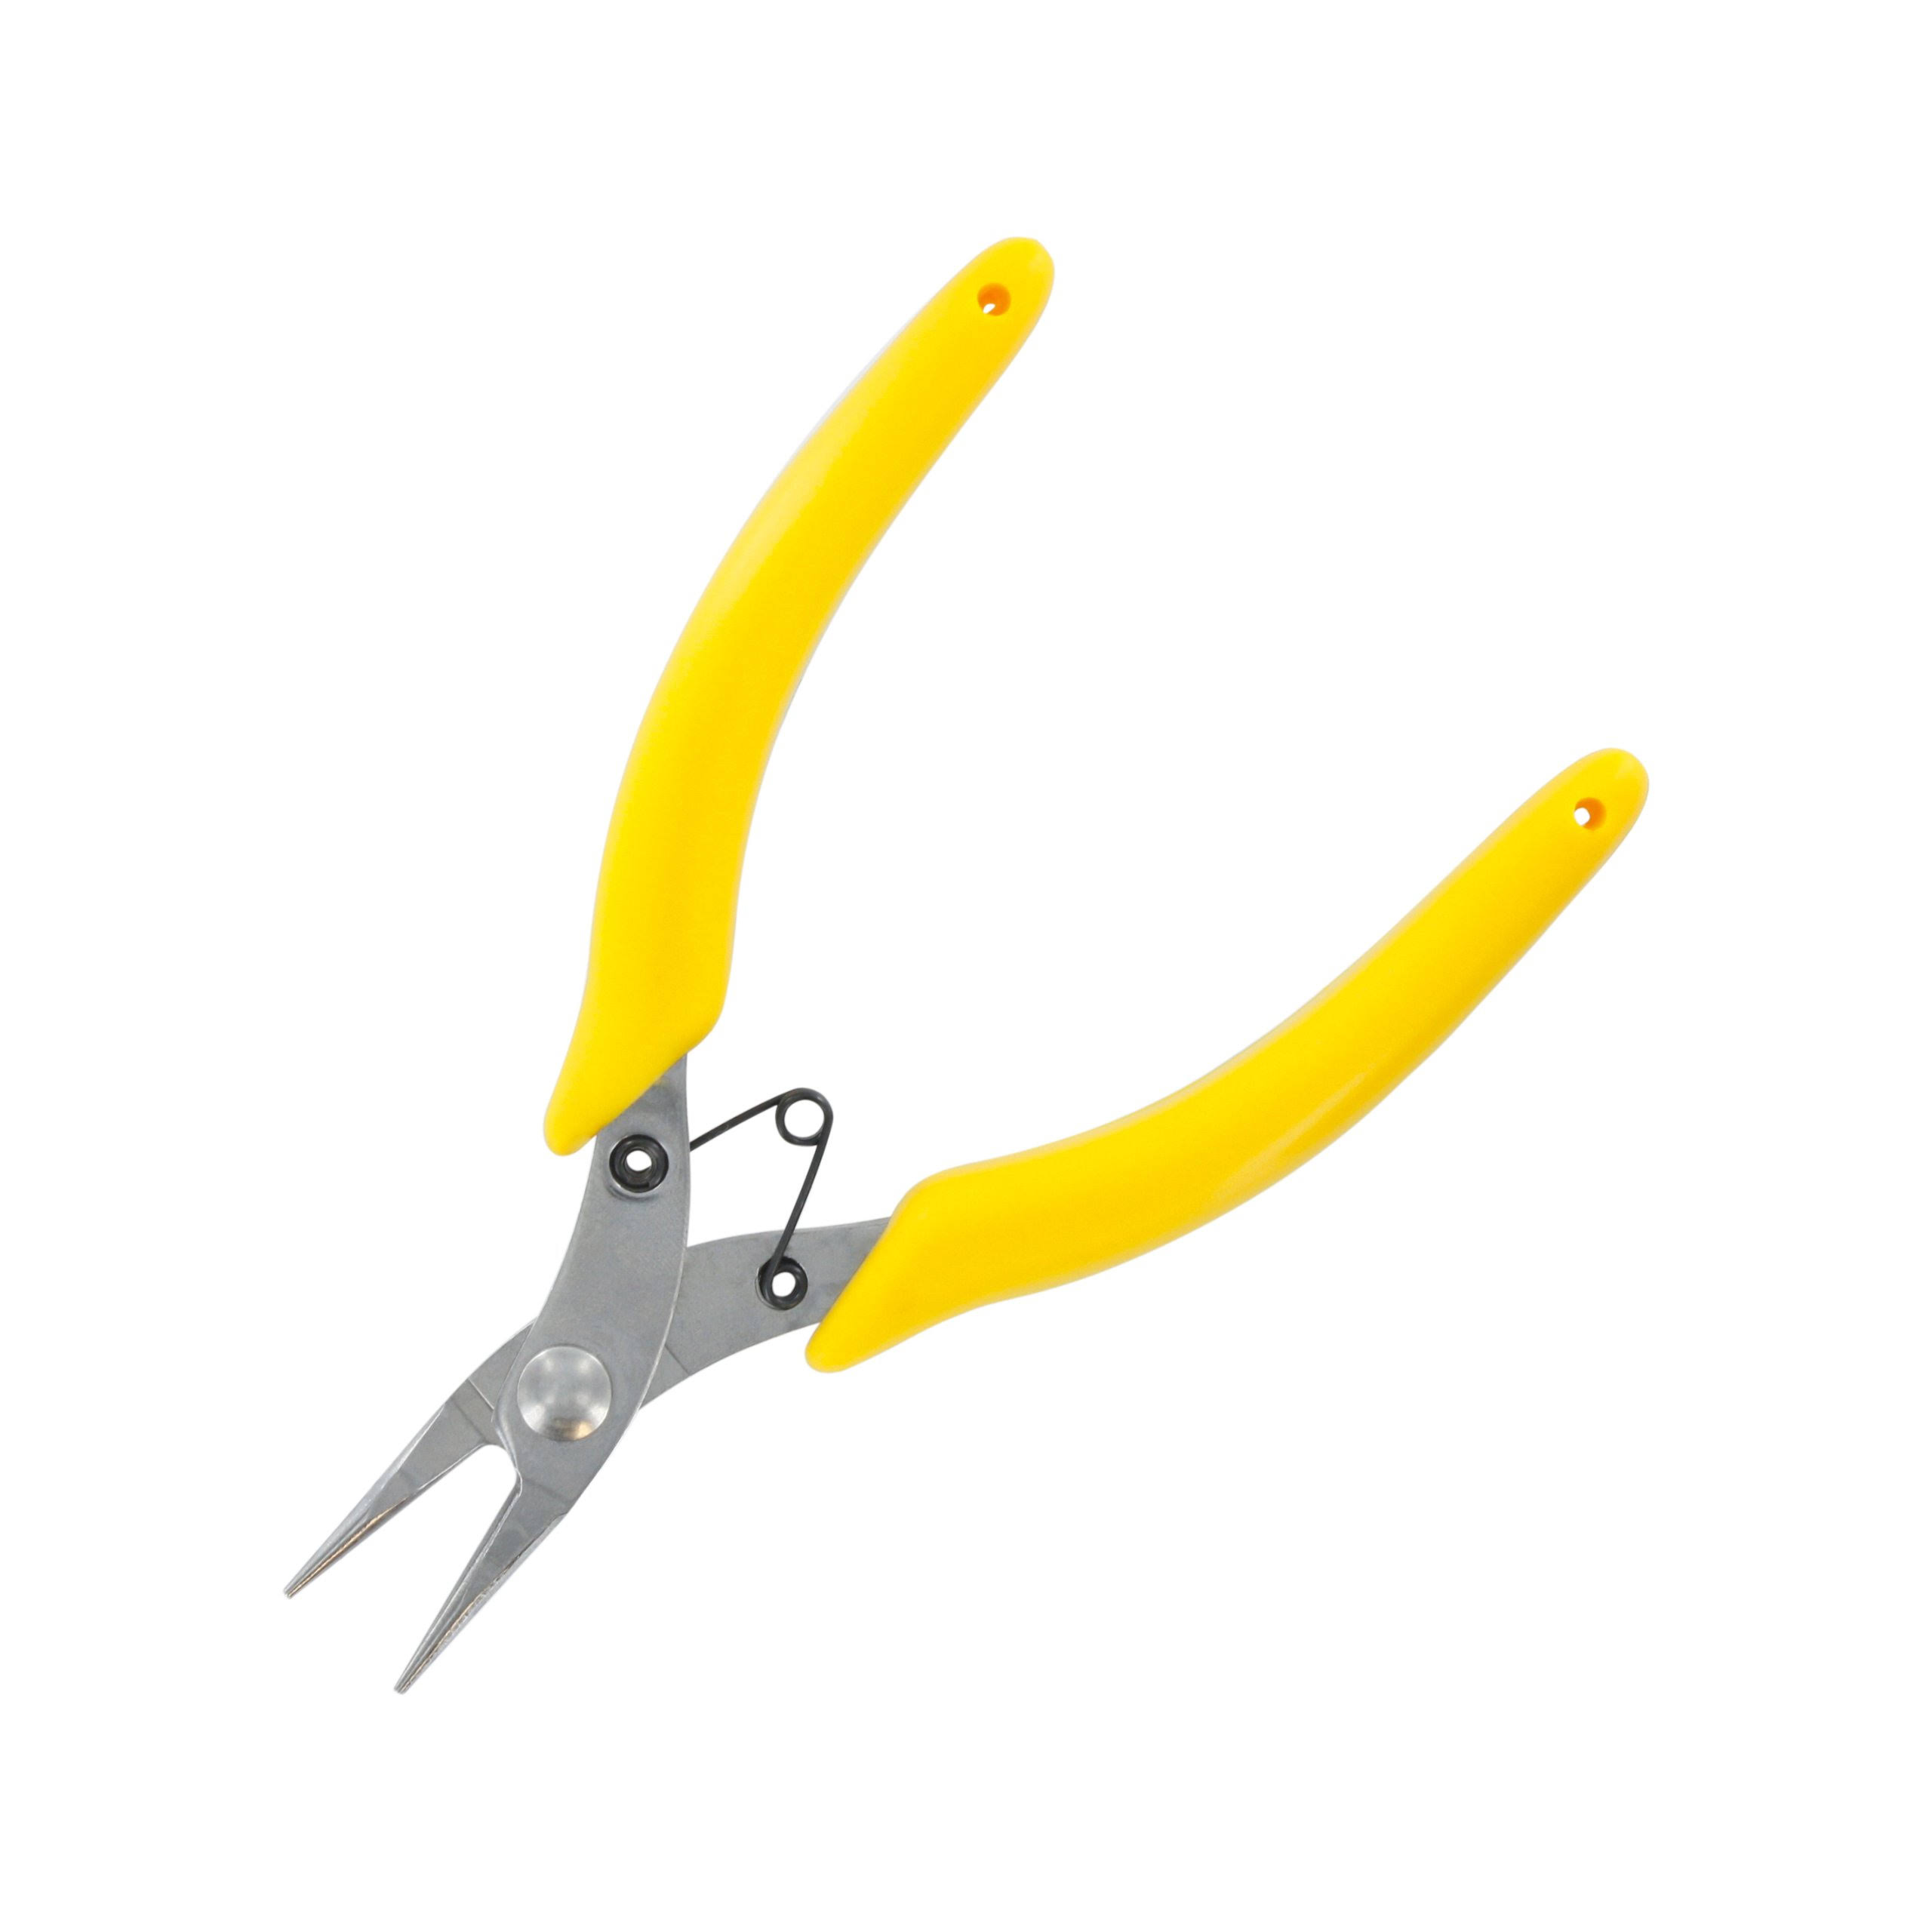 Army Painter Hobby Pliers